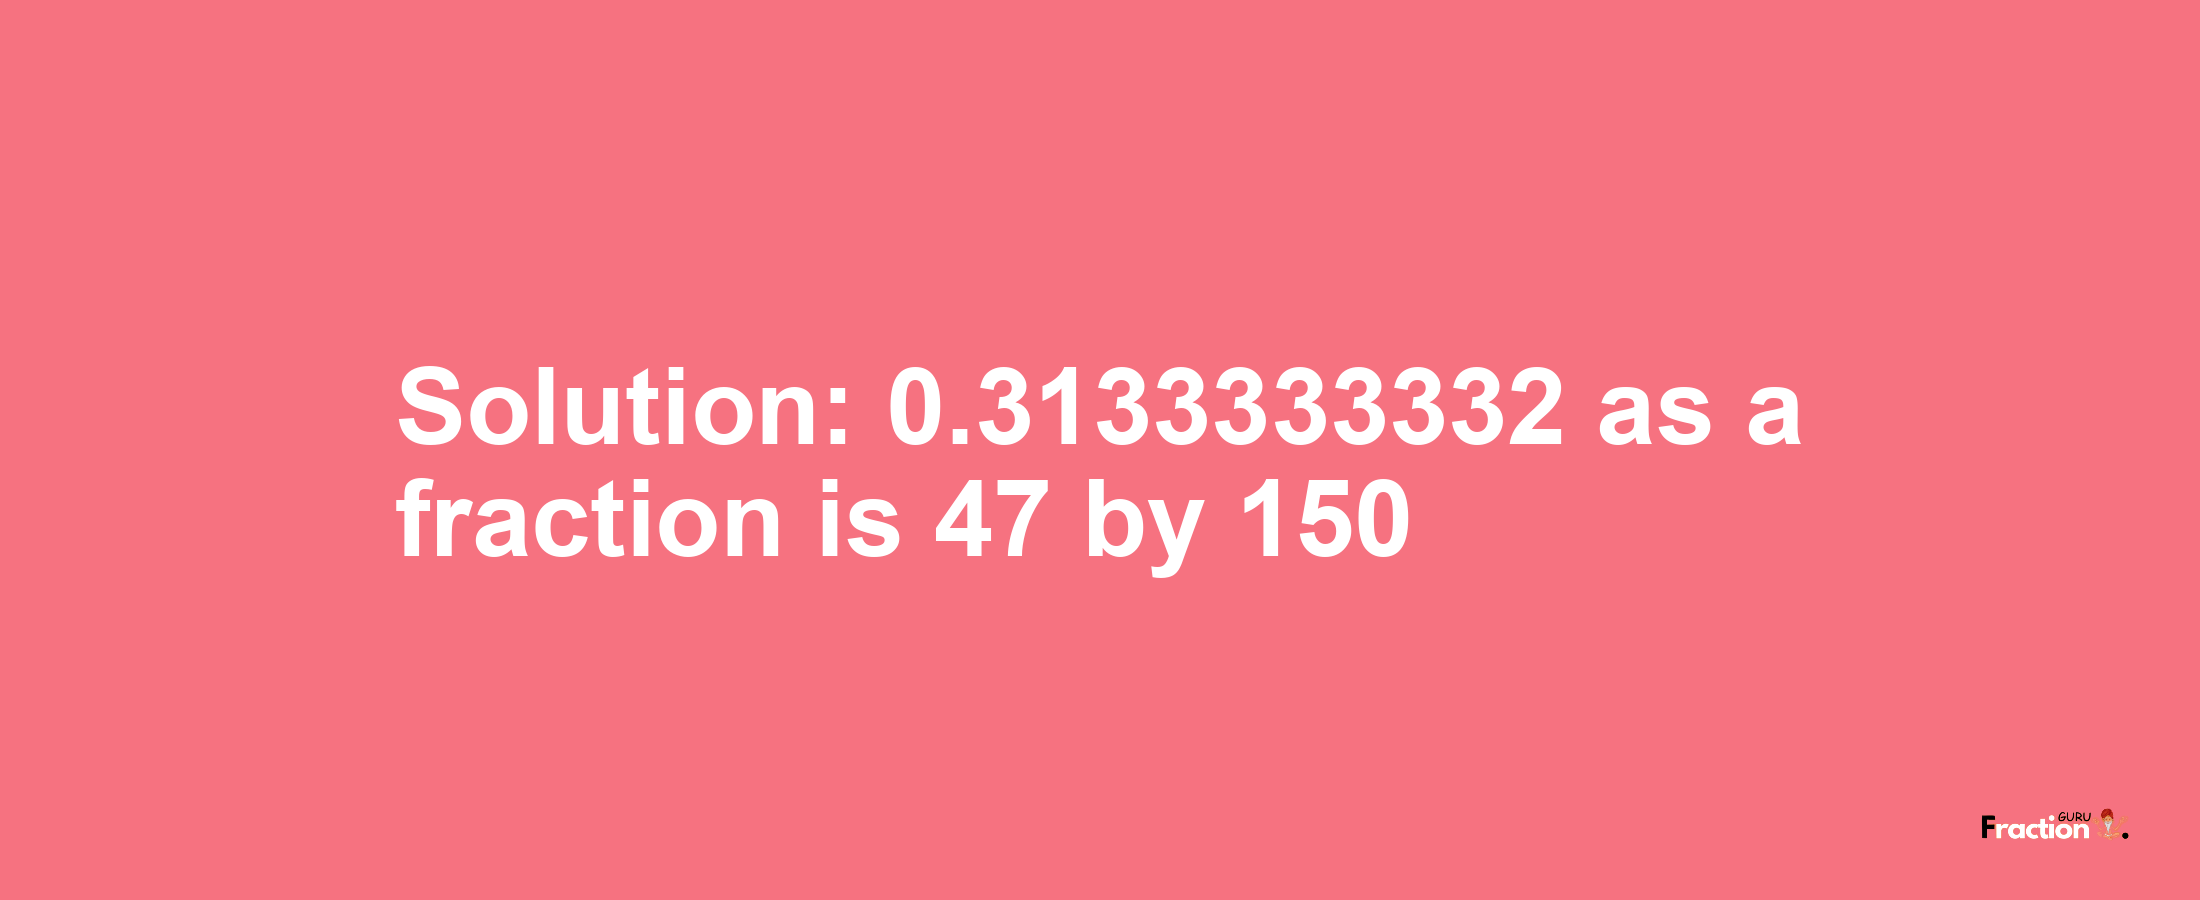 Solution:0.3133333332 as a fraction is 47/150